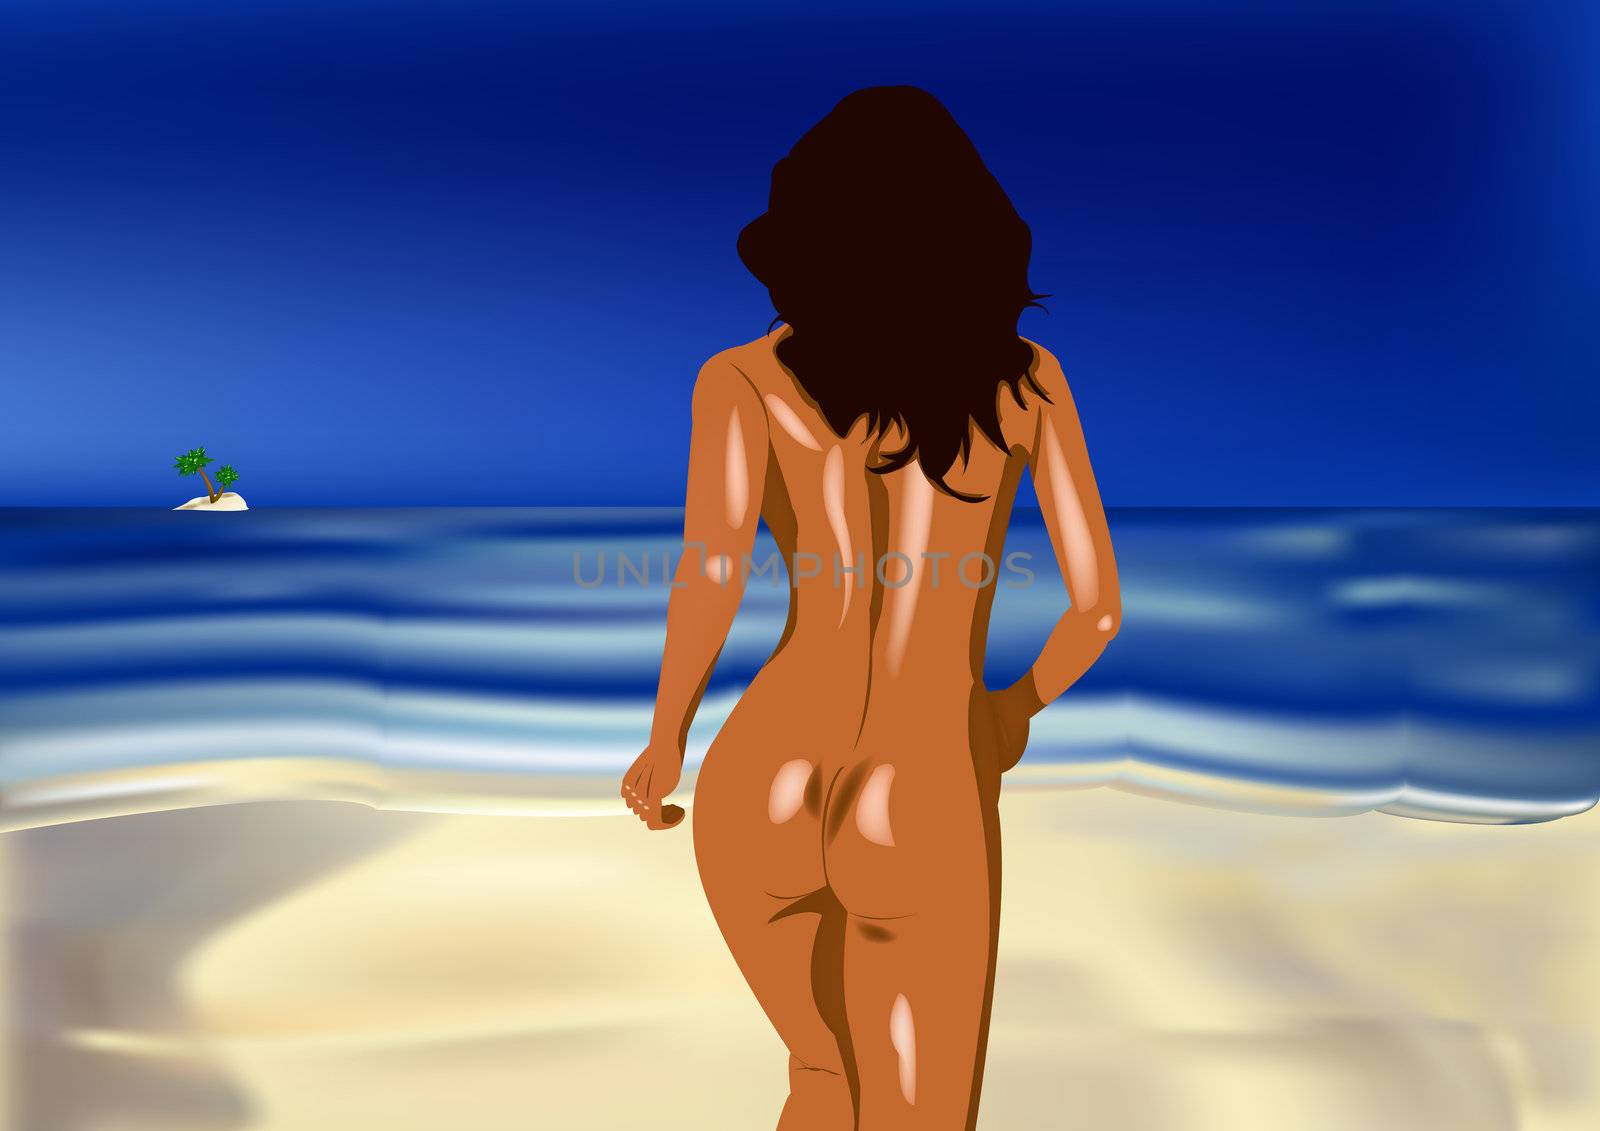 The sexual young suntanned girl runs on a beach to the azure sea